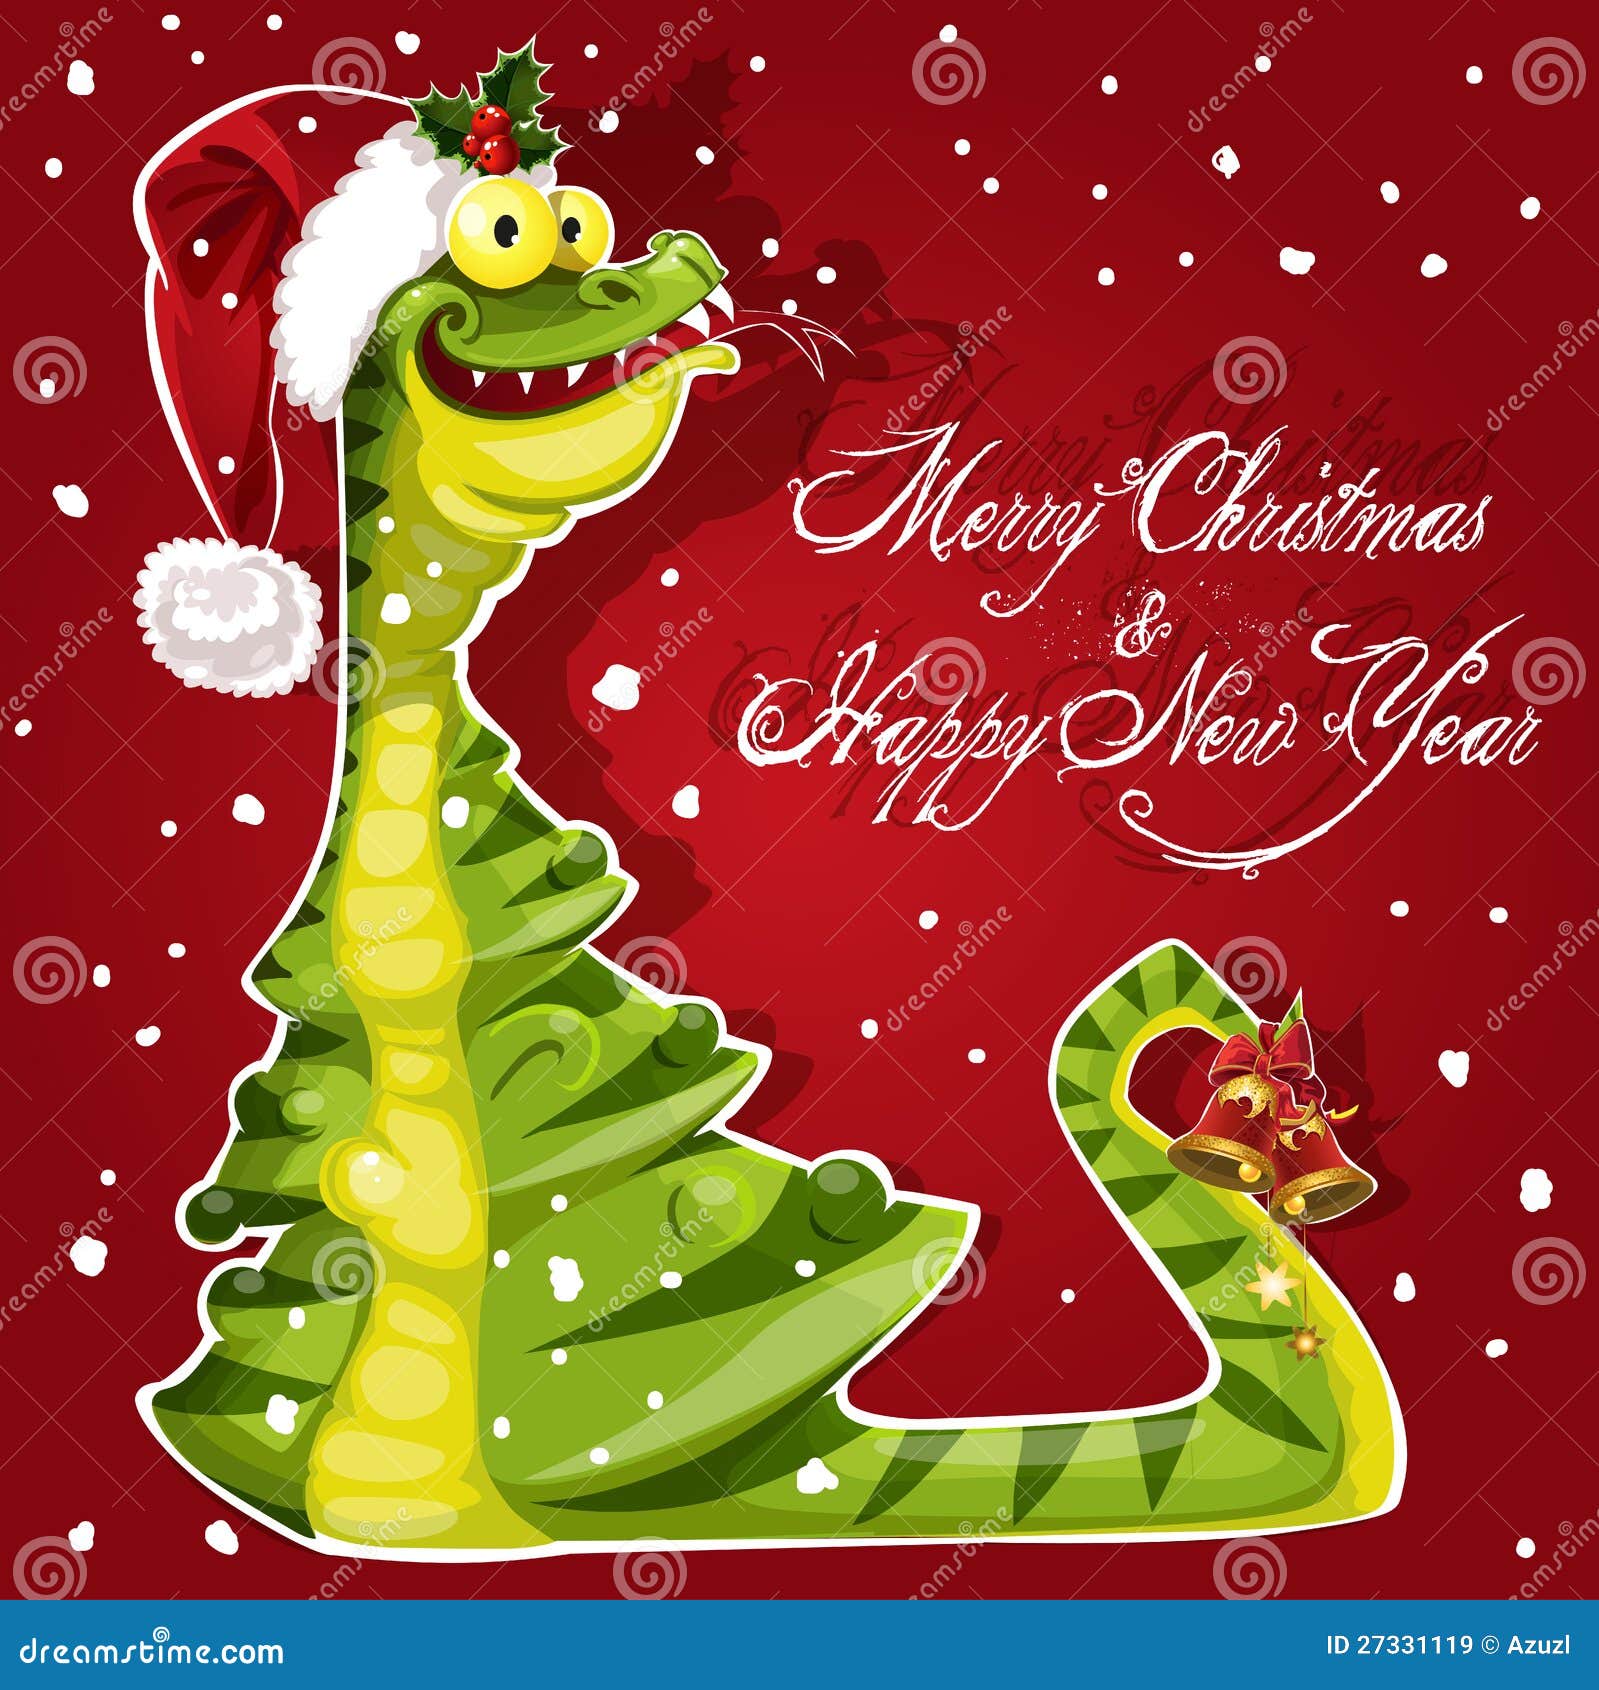 Snake.io on X: Wishing you a season full of Yuletide cheer, Happy Holidays  to all our dears Snakes! PLAY NOW:  #snakeio  #Christmas2020  / X